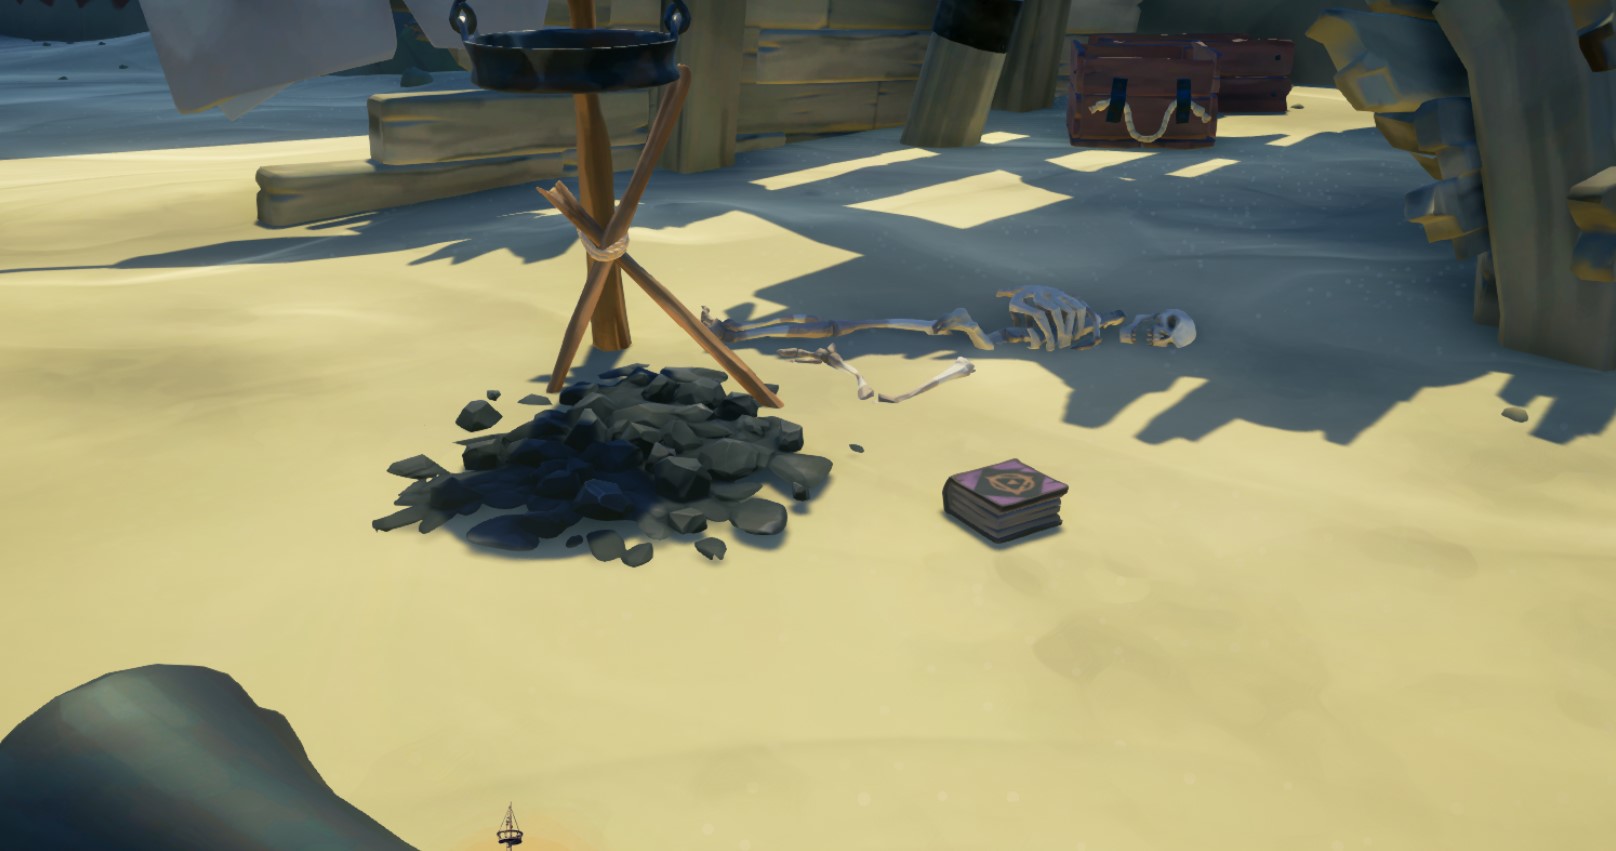  Where to find Wanda’s journals at Mermaid’s Hideaway, Thieves’ Haven, and Sunken Grove in Sea of Thieves 